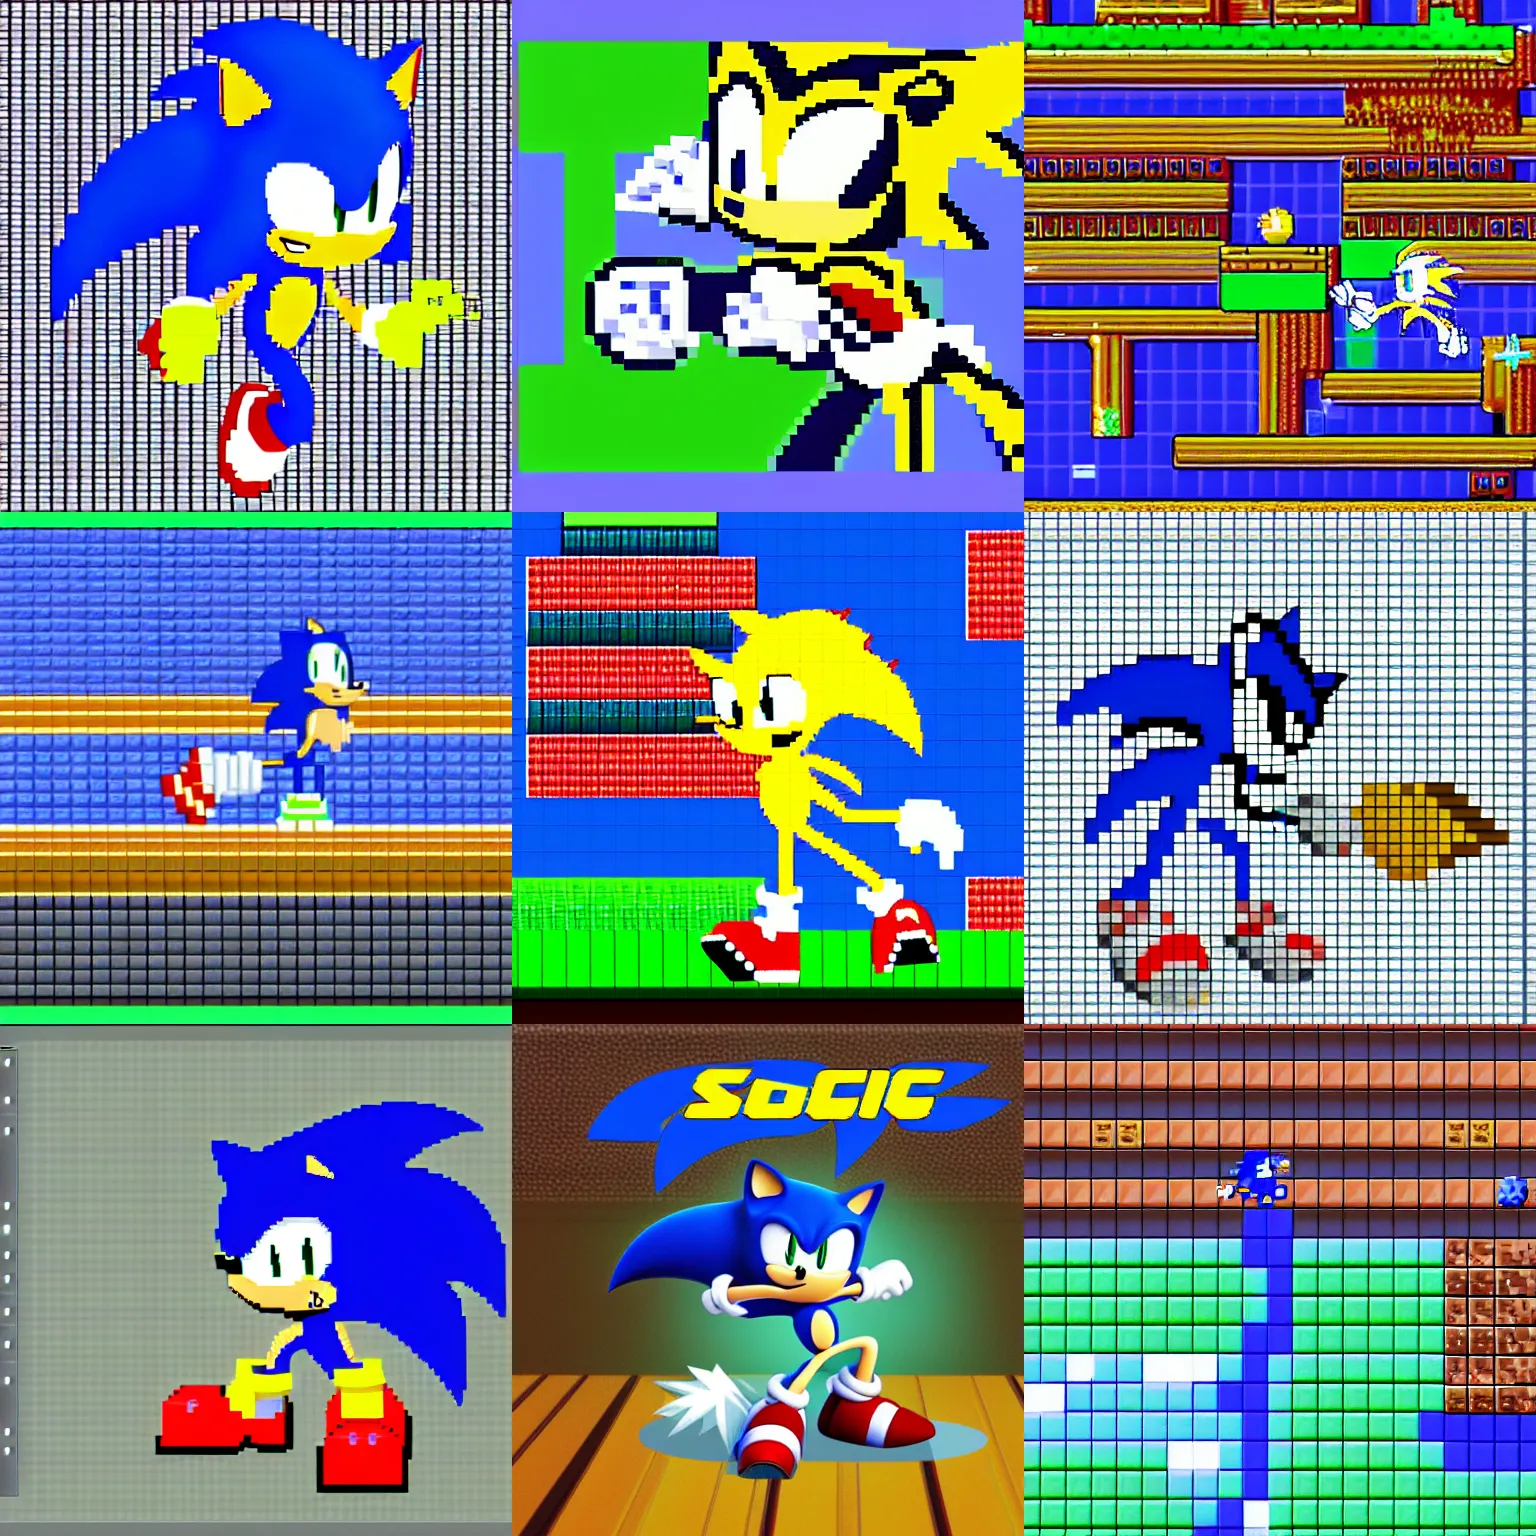 AudioReam on X: This is just an Ordinary Pixel Art of Sonic in